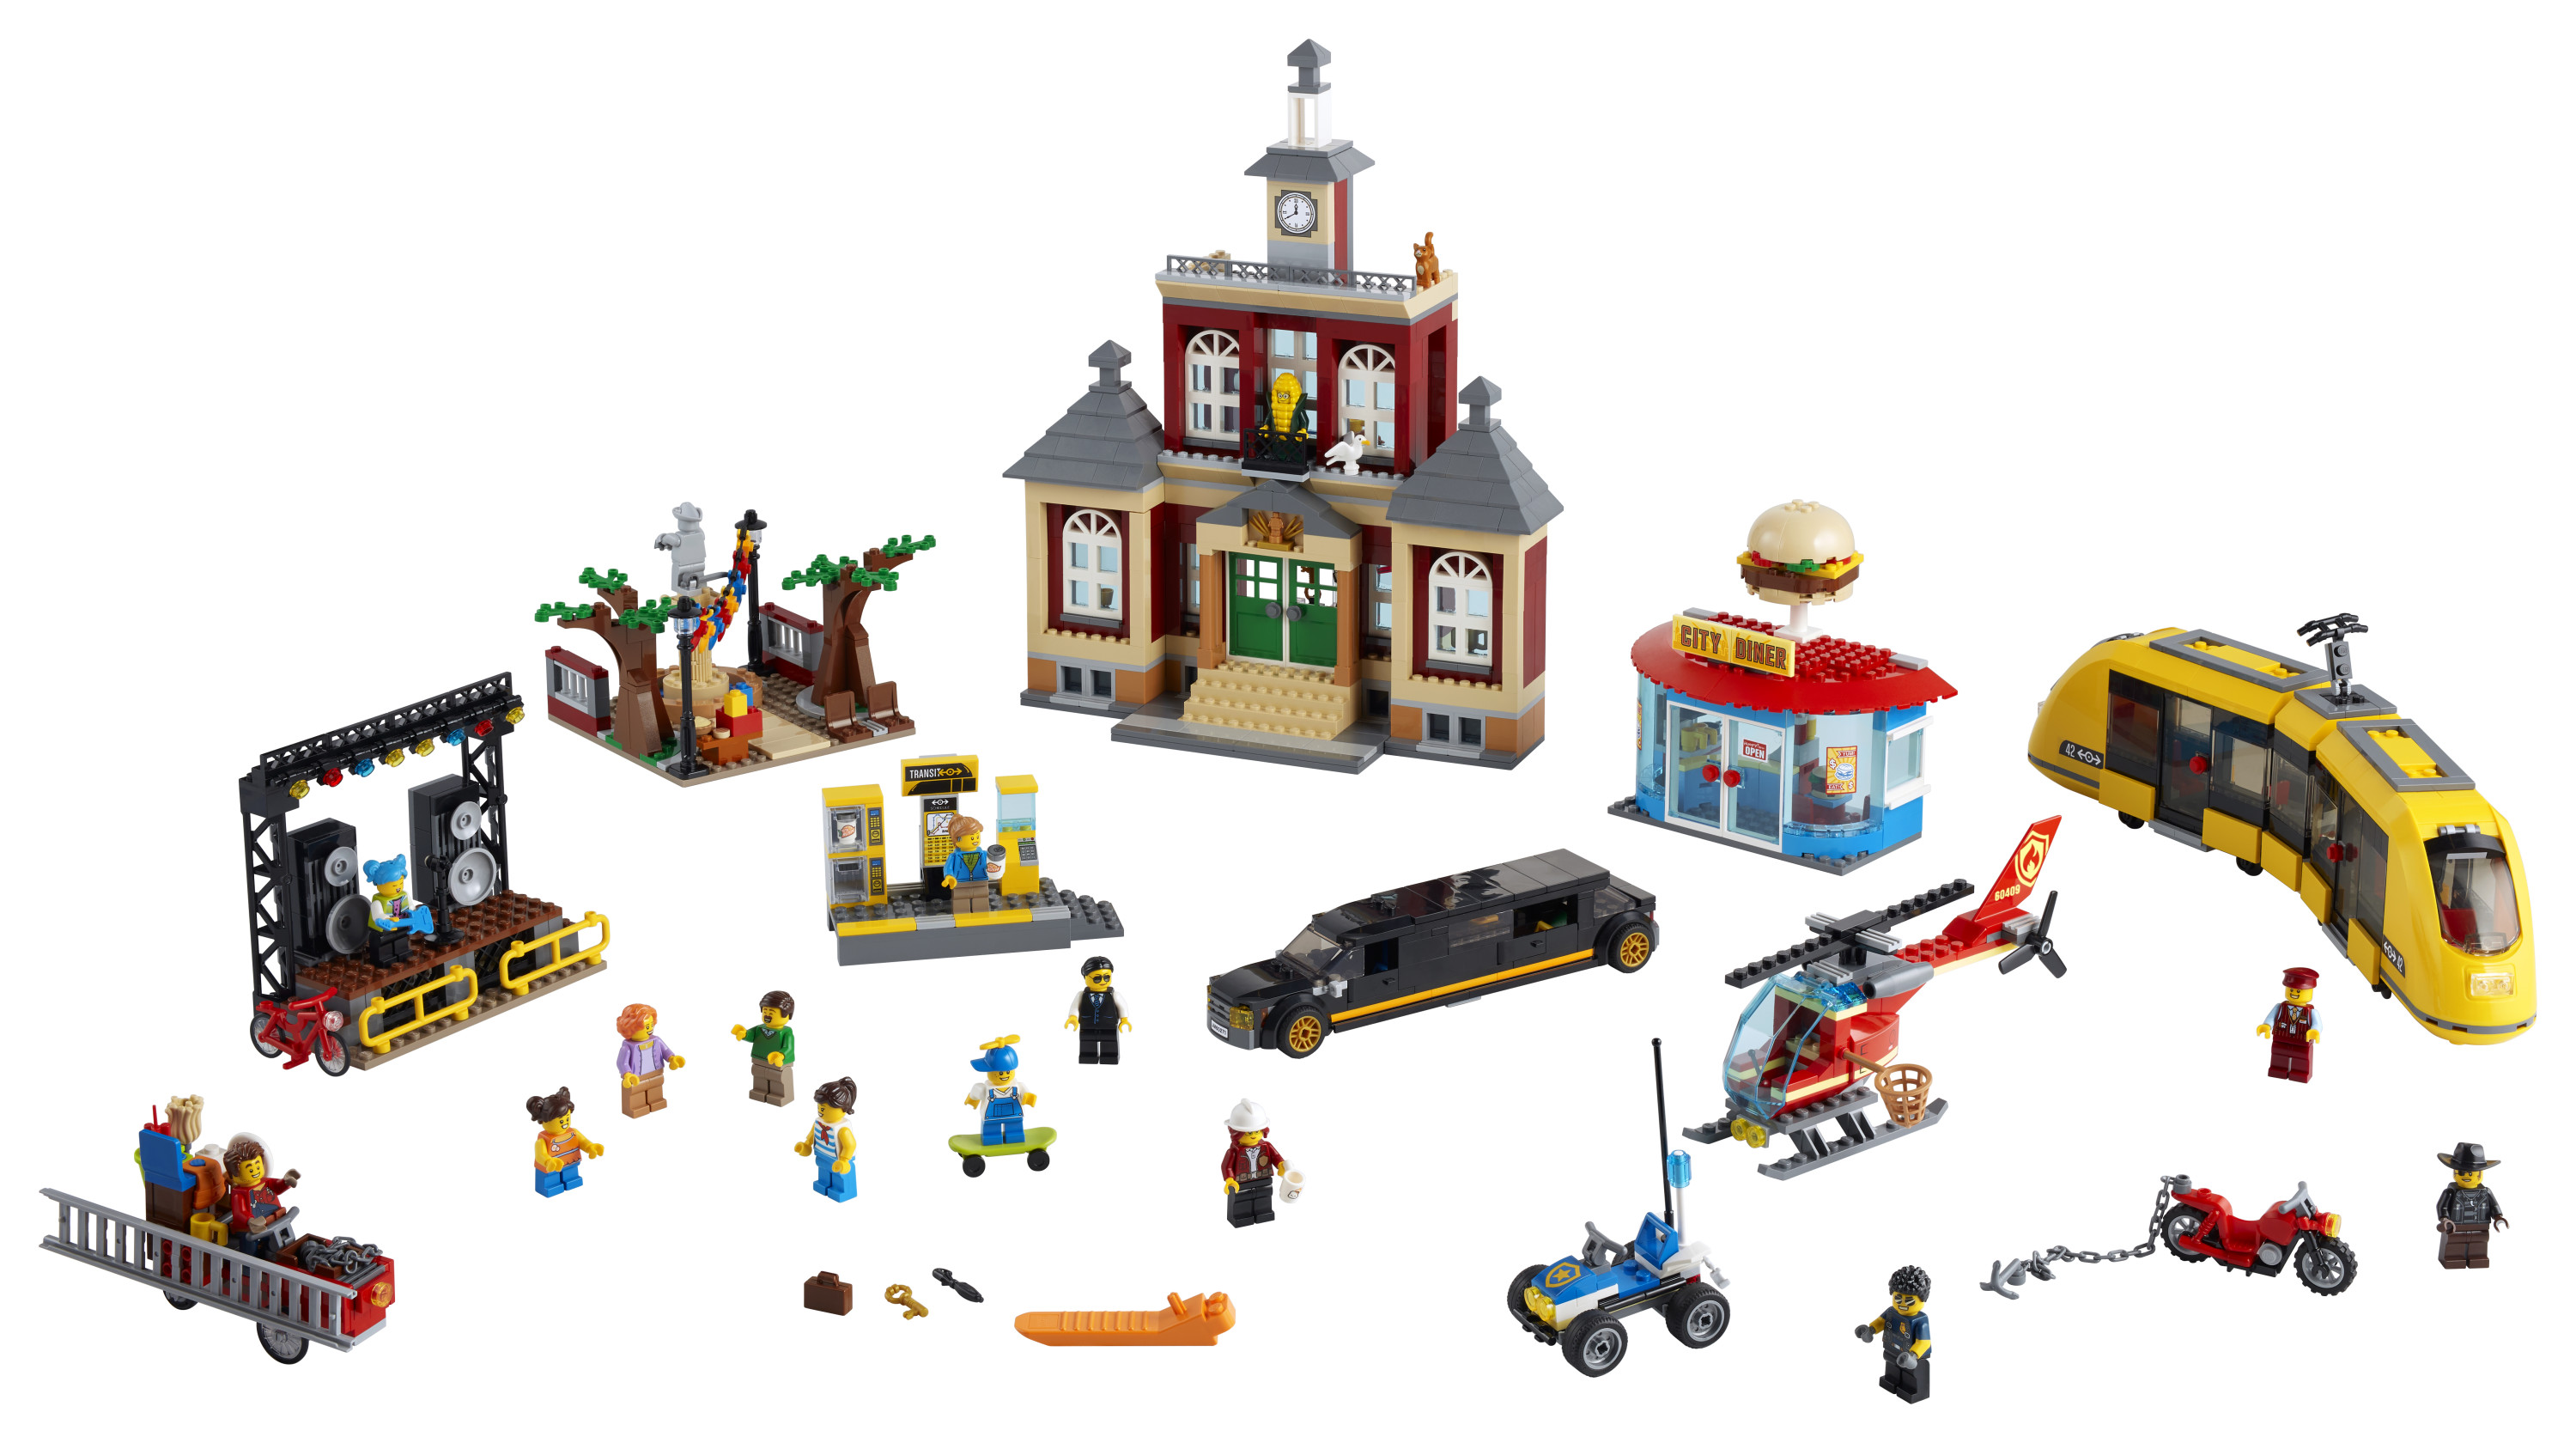 LEGO City Main Square 60271 Cool Building Toy for Kids (1,517 Pieces) - image 3 of 7